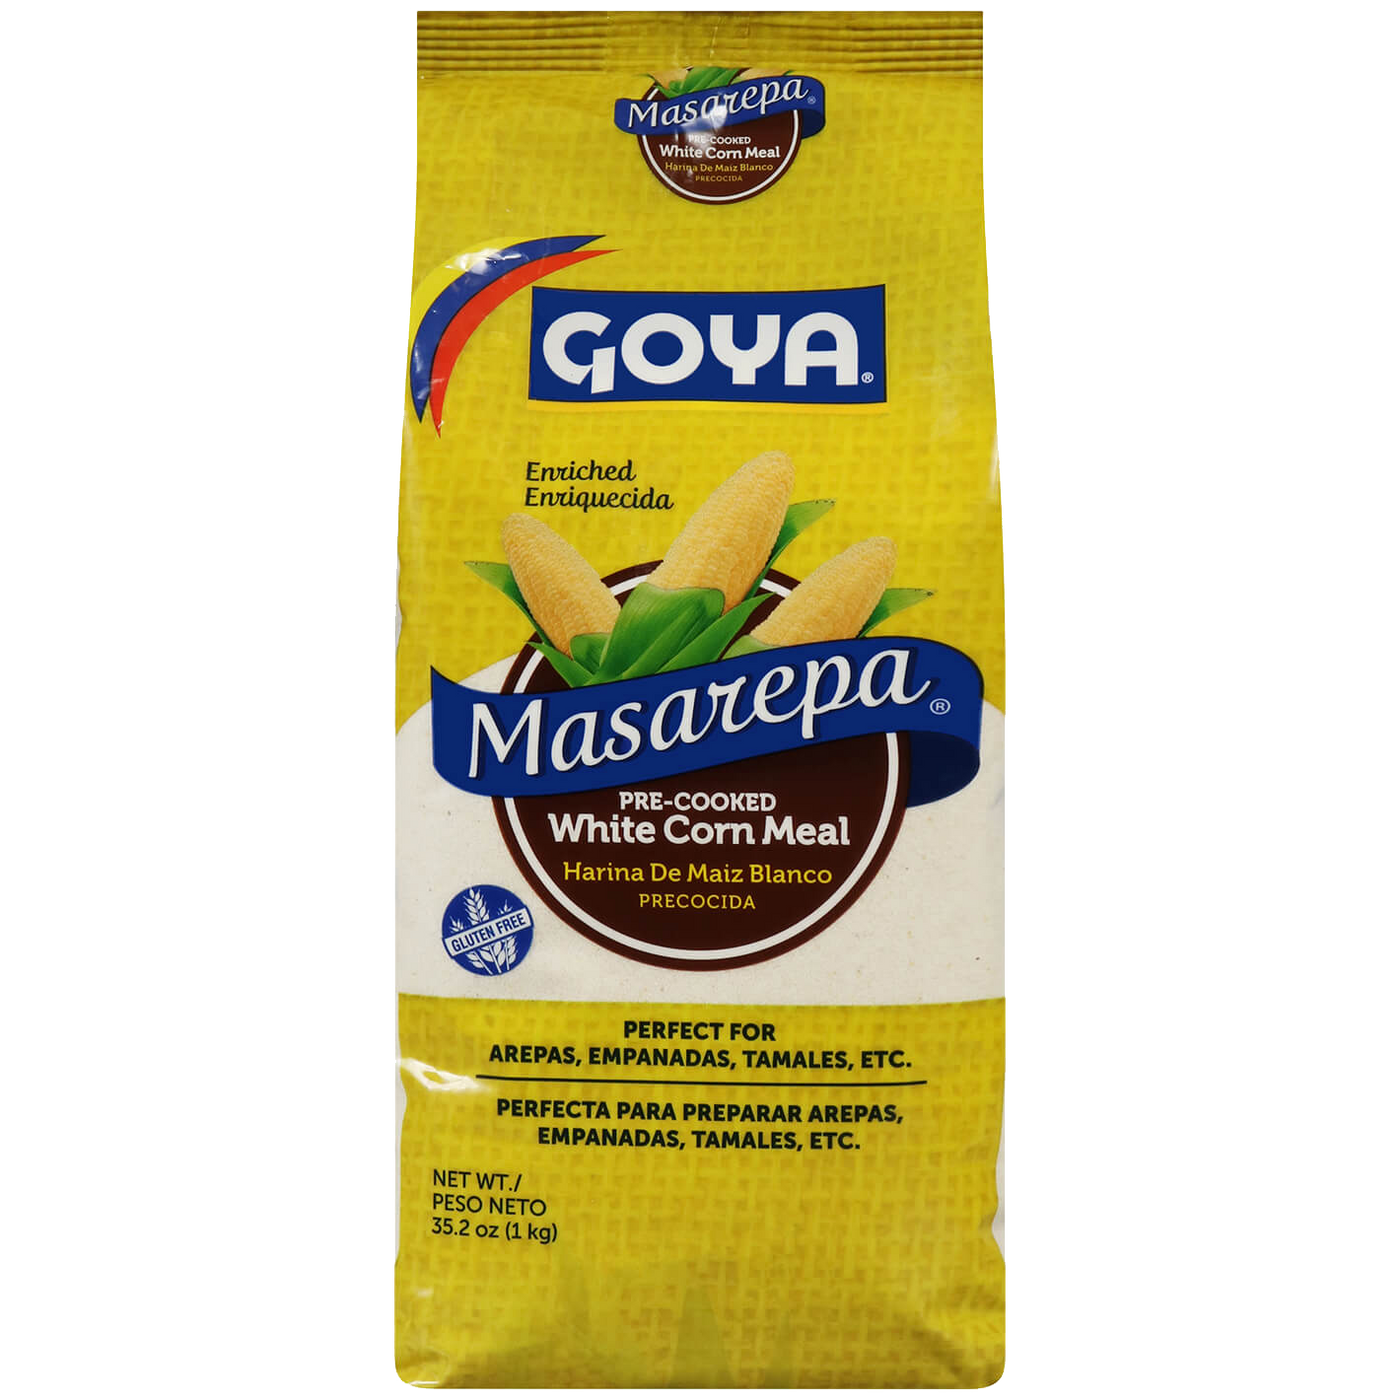   Goya Pre-Cooked White Corn Meal